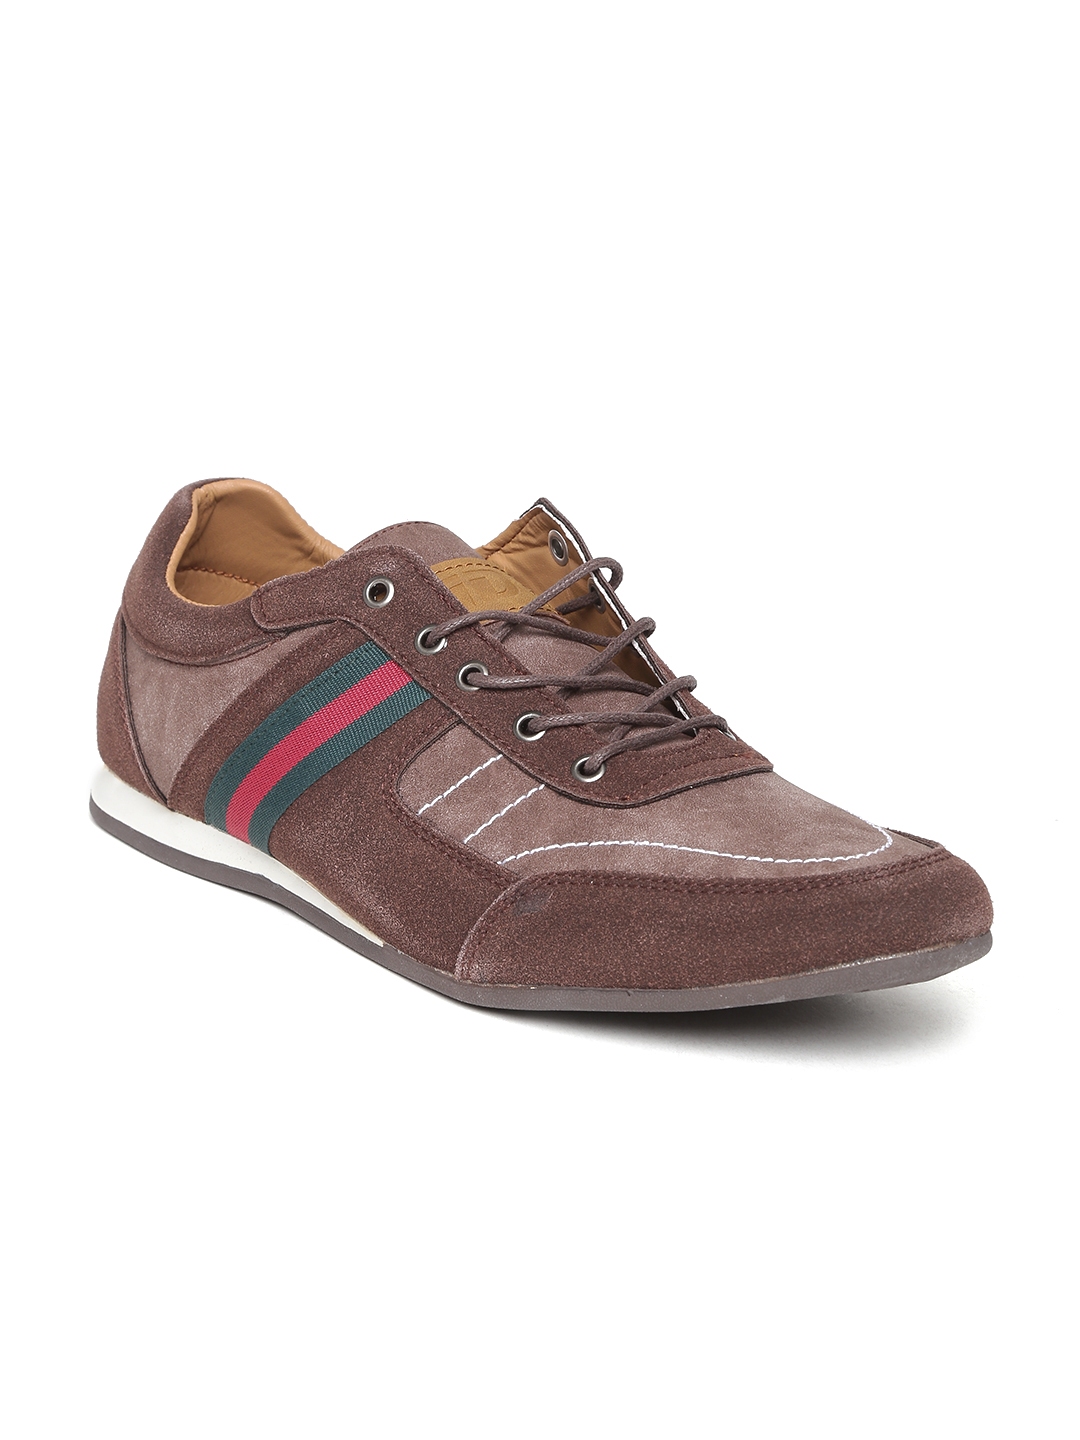 Buy ID Men Brown Solid Sneakers - Casual Shoes for Men 1644643 | Myntra